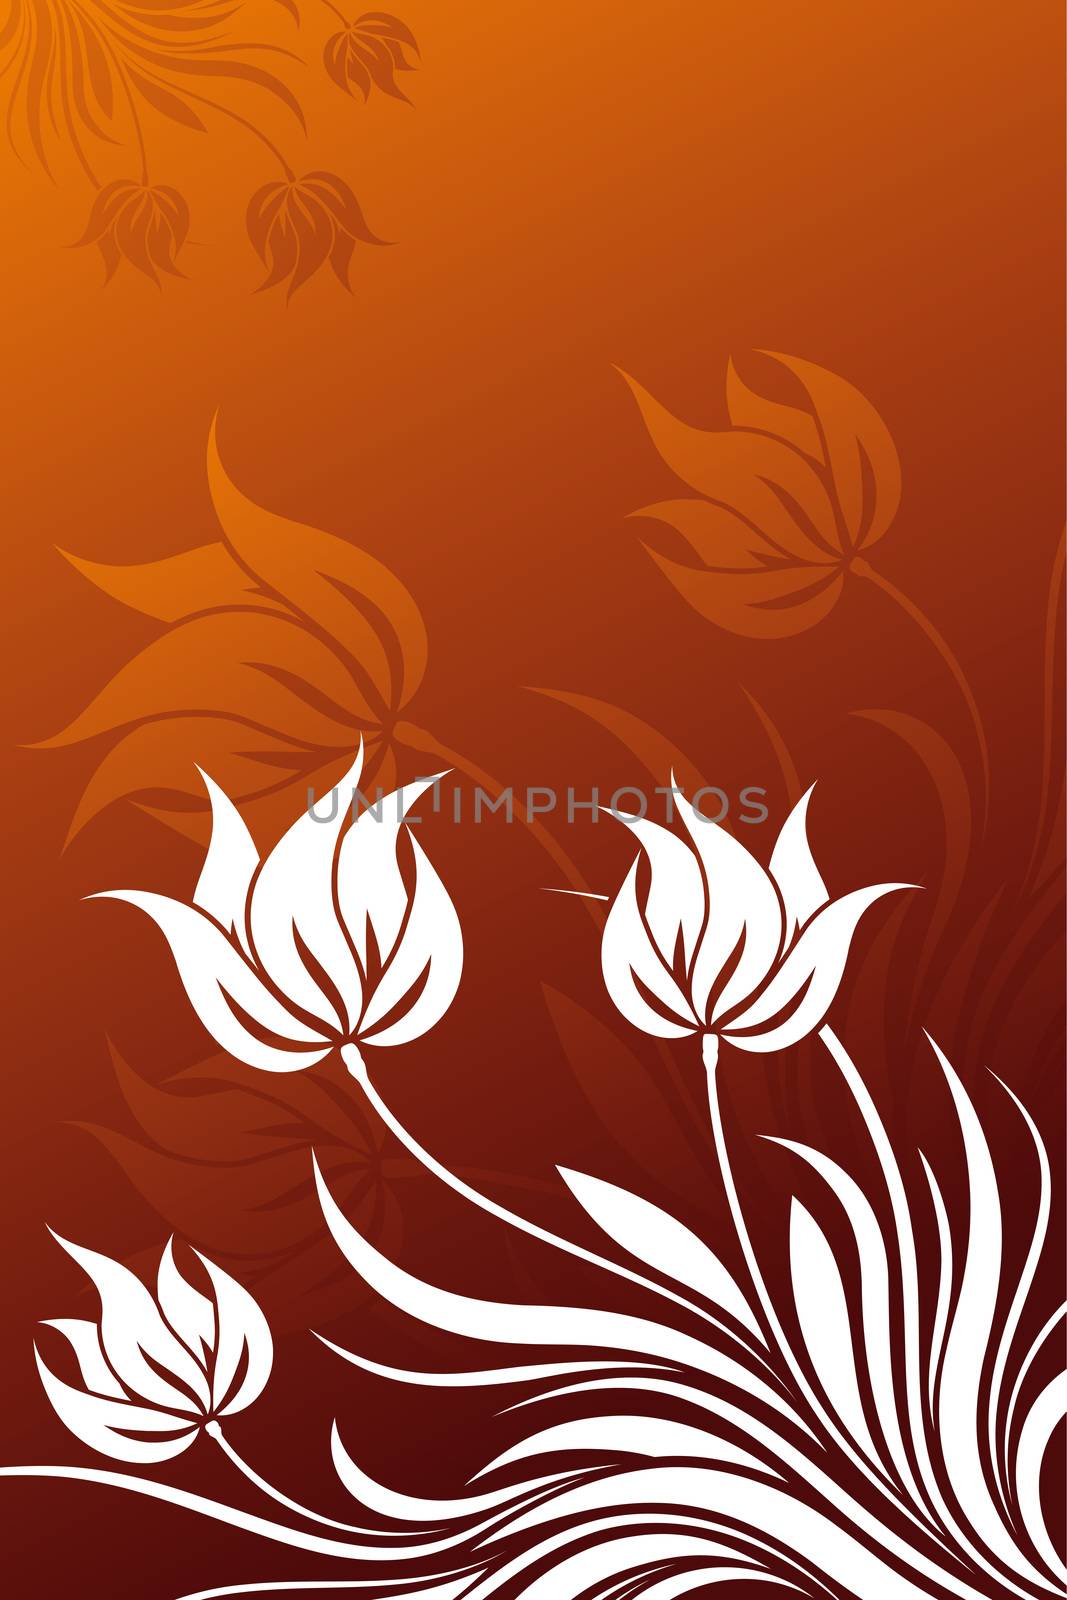 Abstract vector floral background decorative flower design